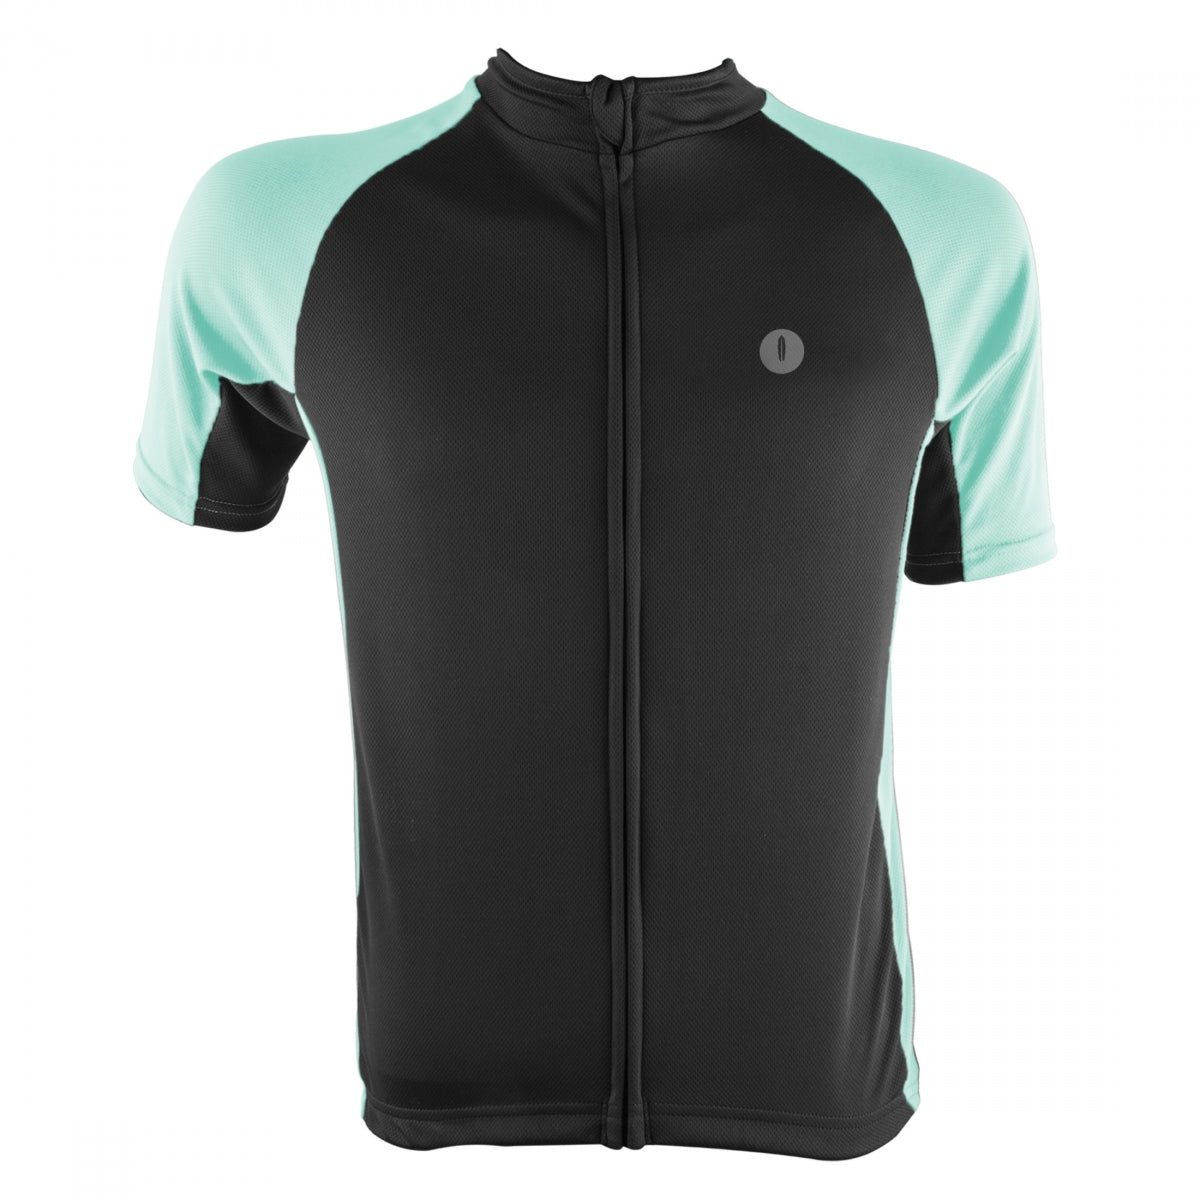 AERIUS CLOTHING JERSEY AERIUS T/S S-SLV XLG MINT